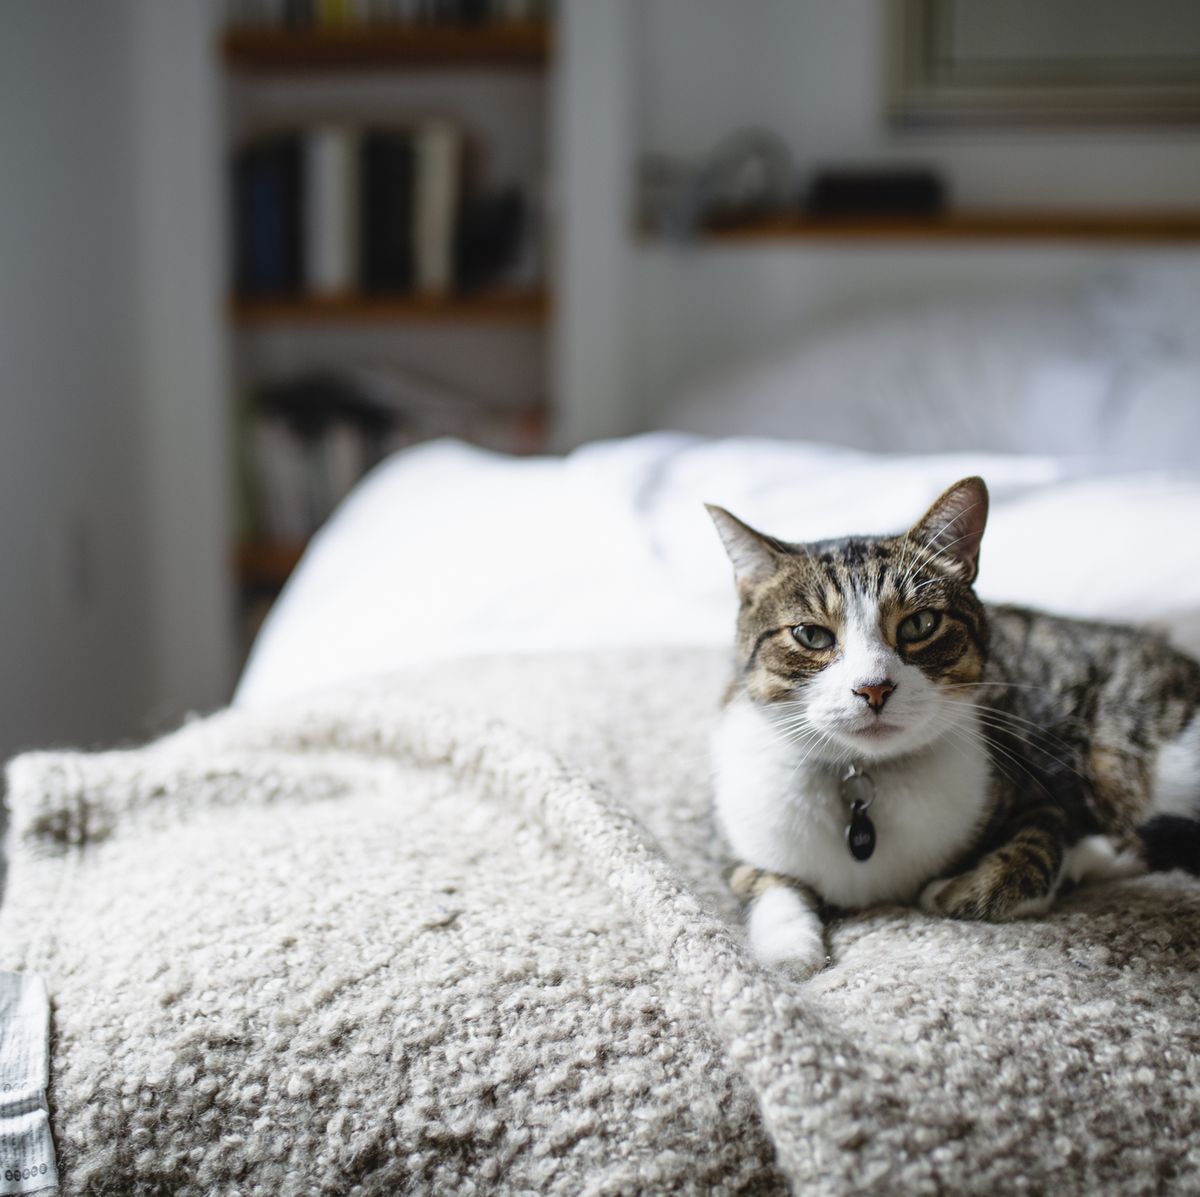 Tabby cat on a bed